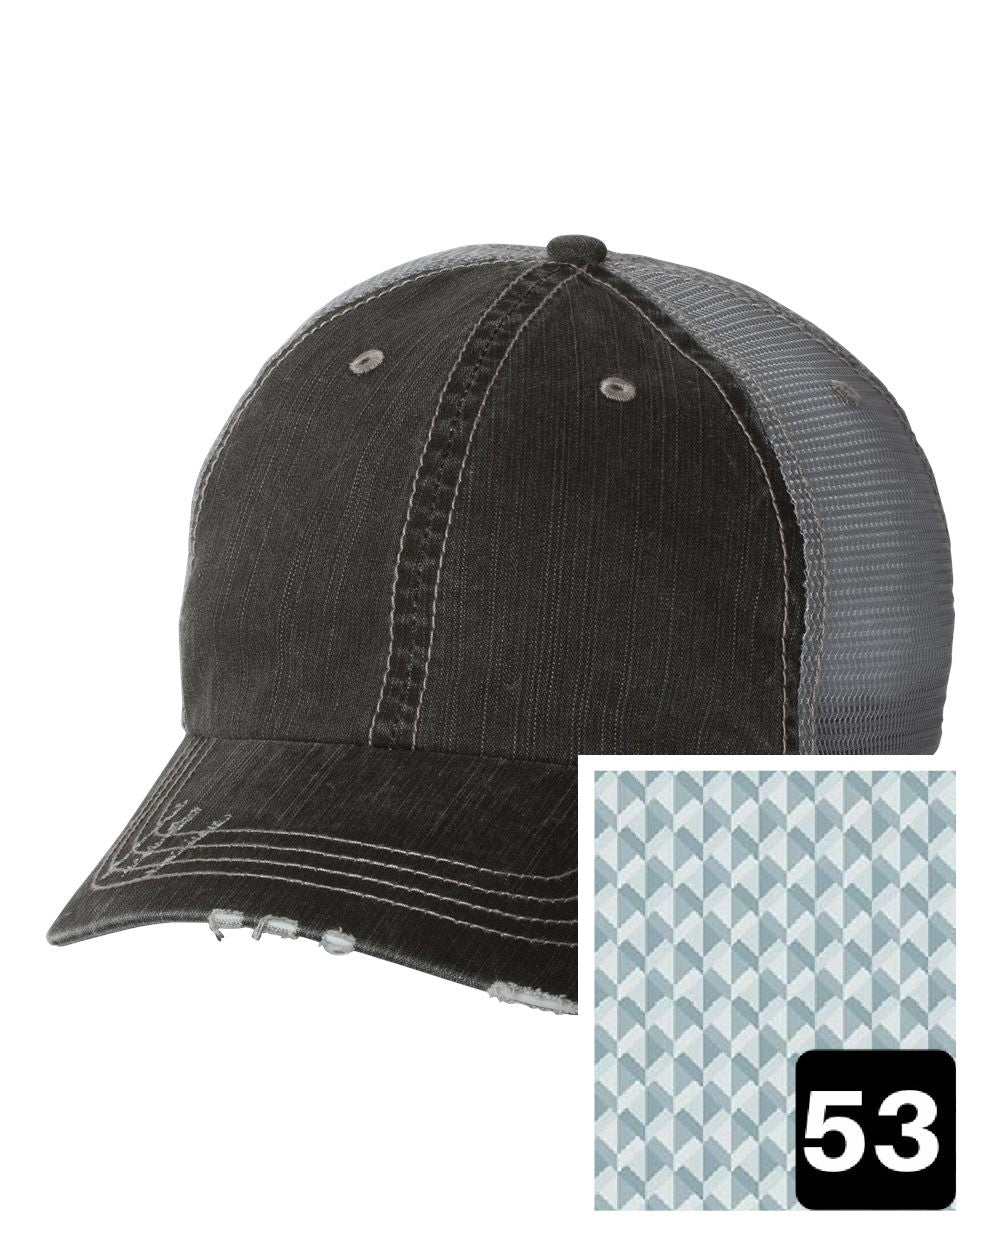 gray distressed trucker hat with multi-color stripe fabric state of Texas